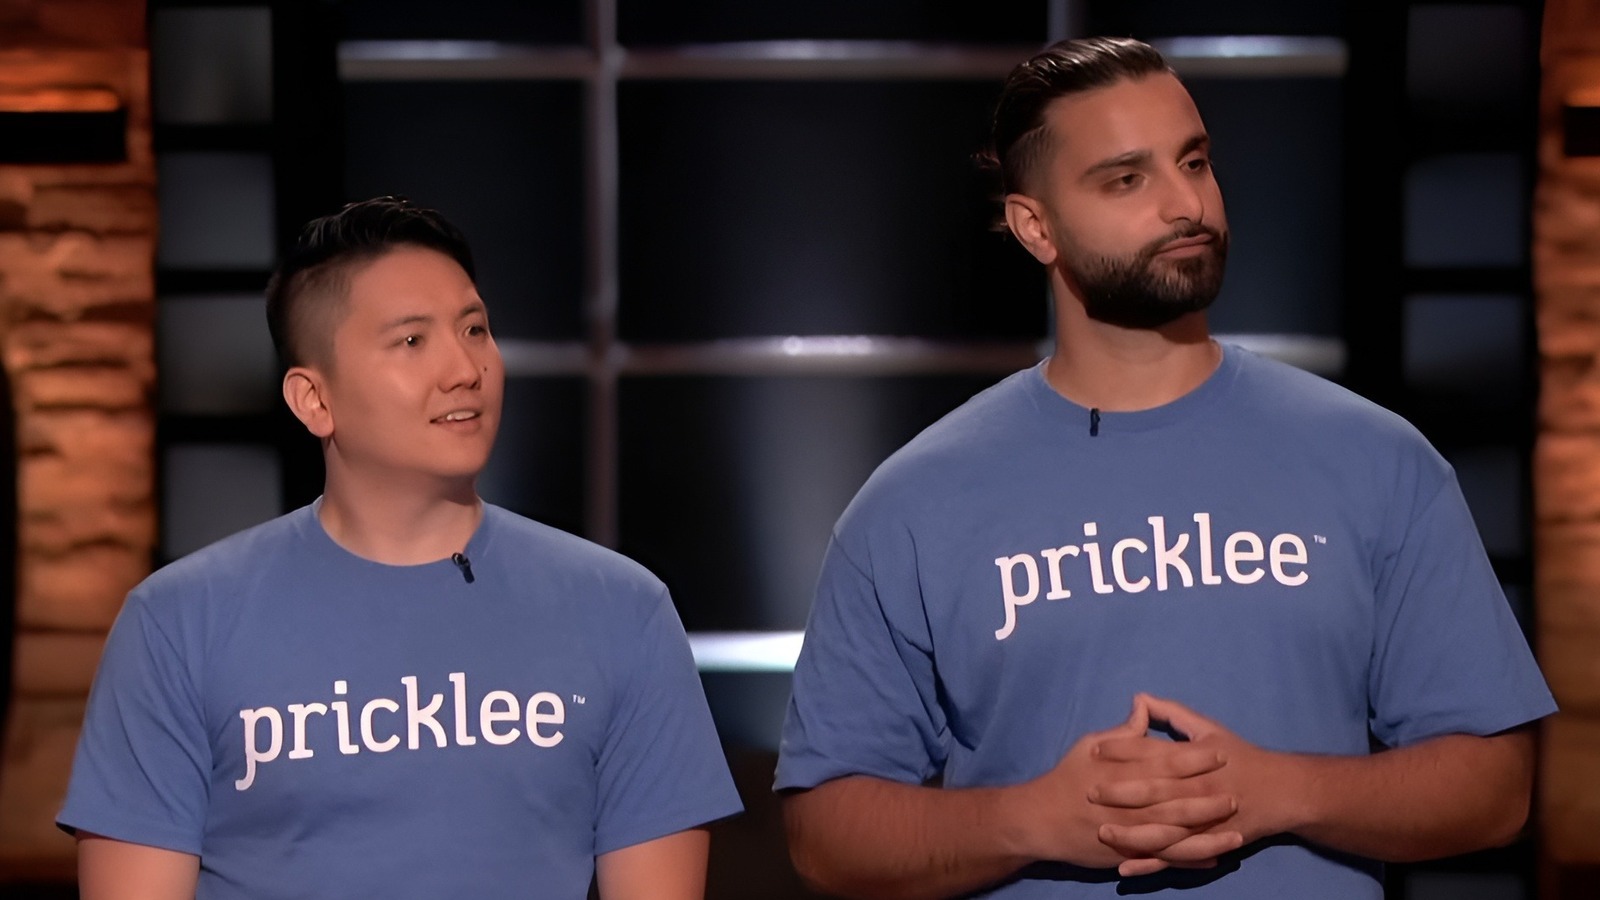 Whatever Happened To Pricklee After Shark Tank?